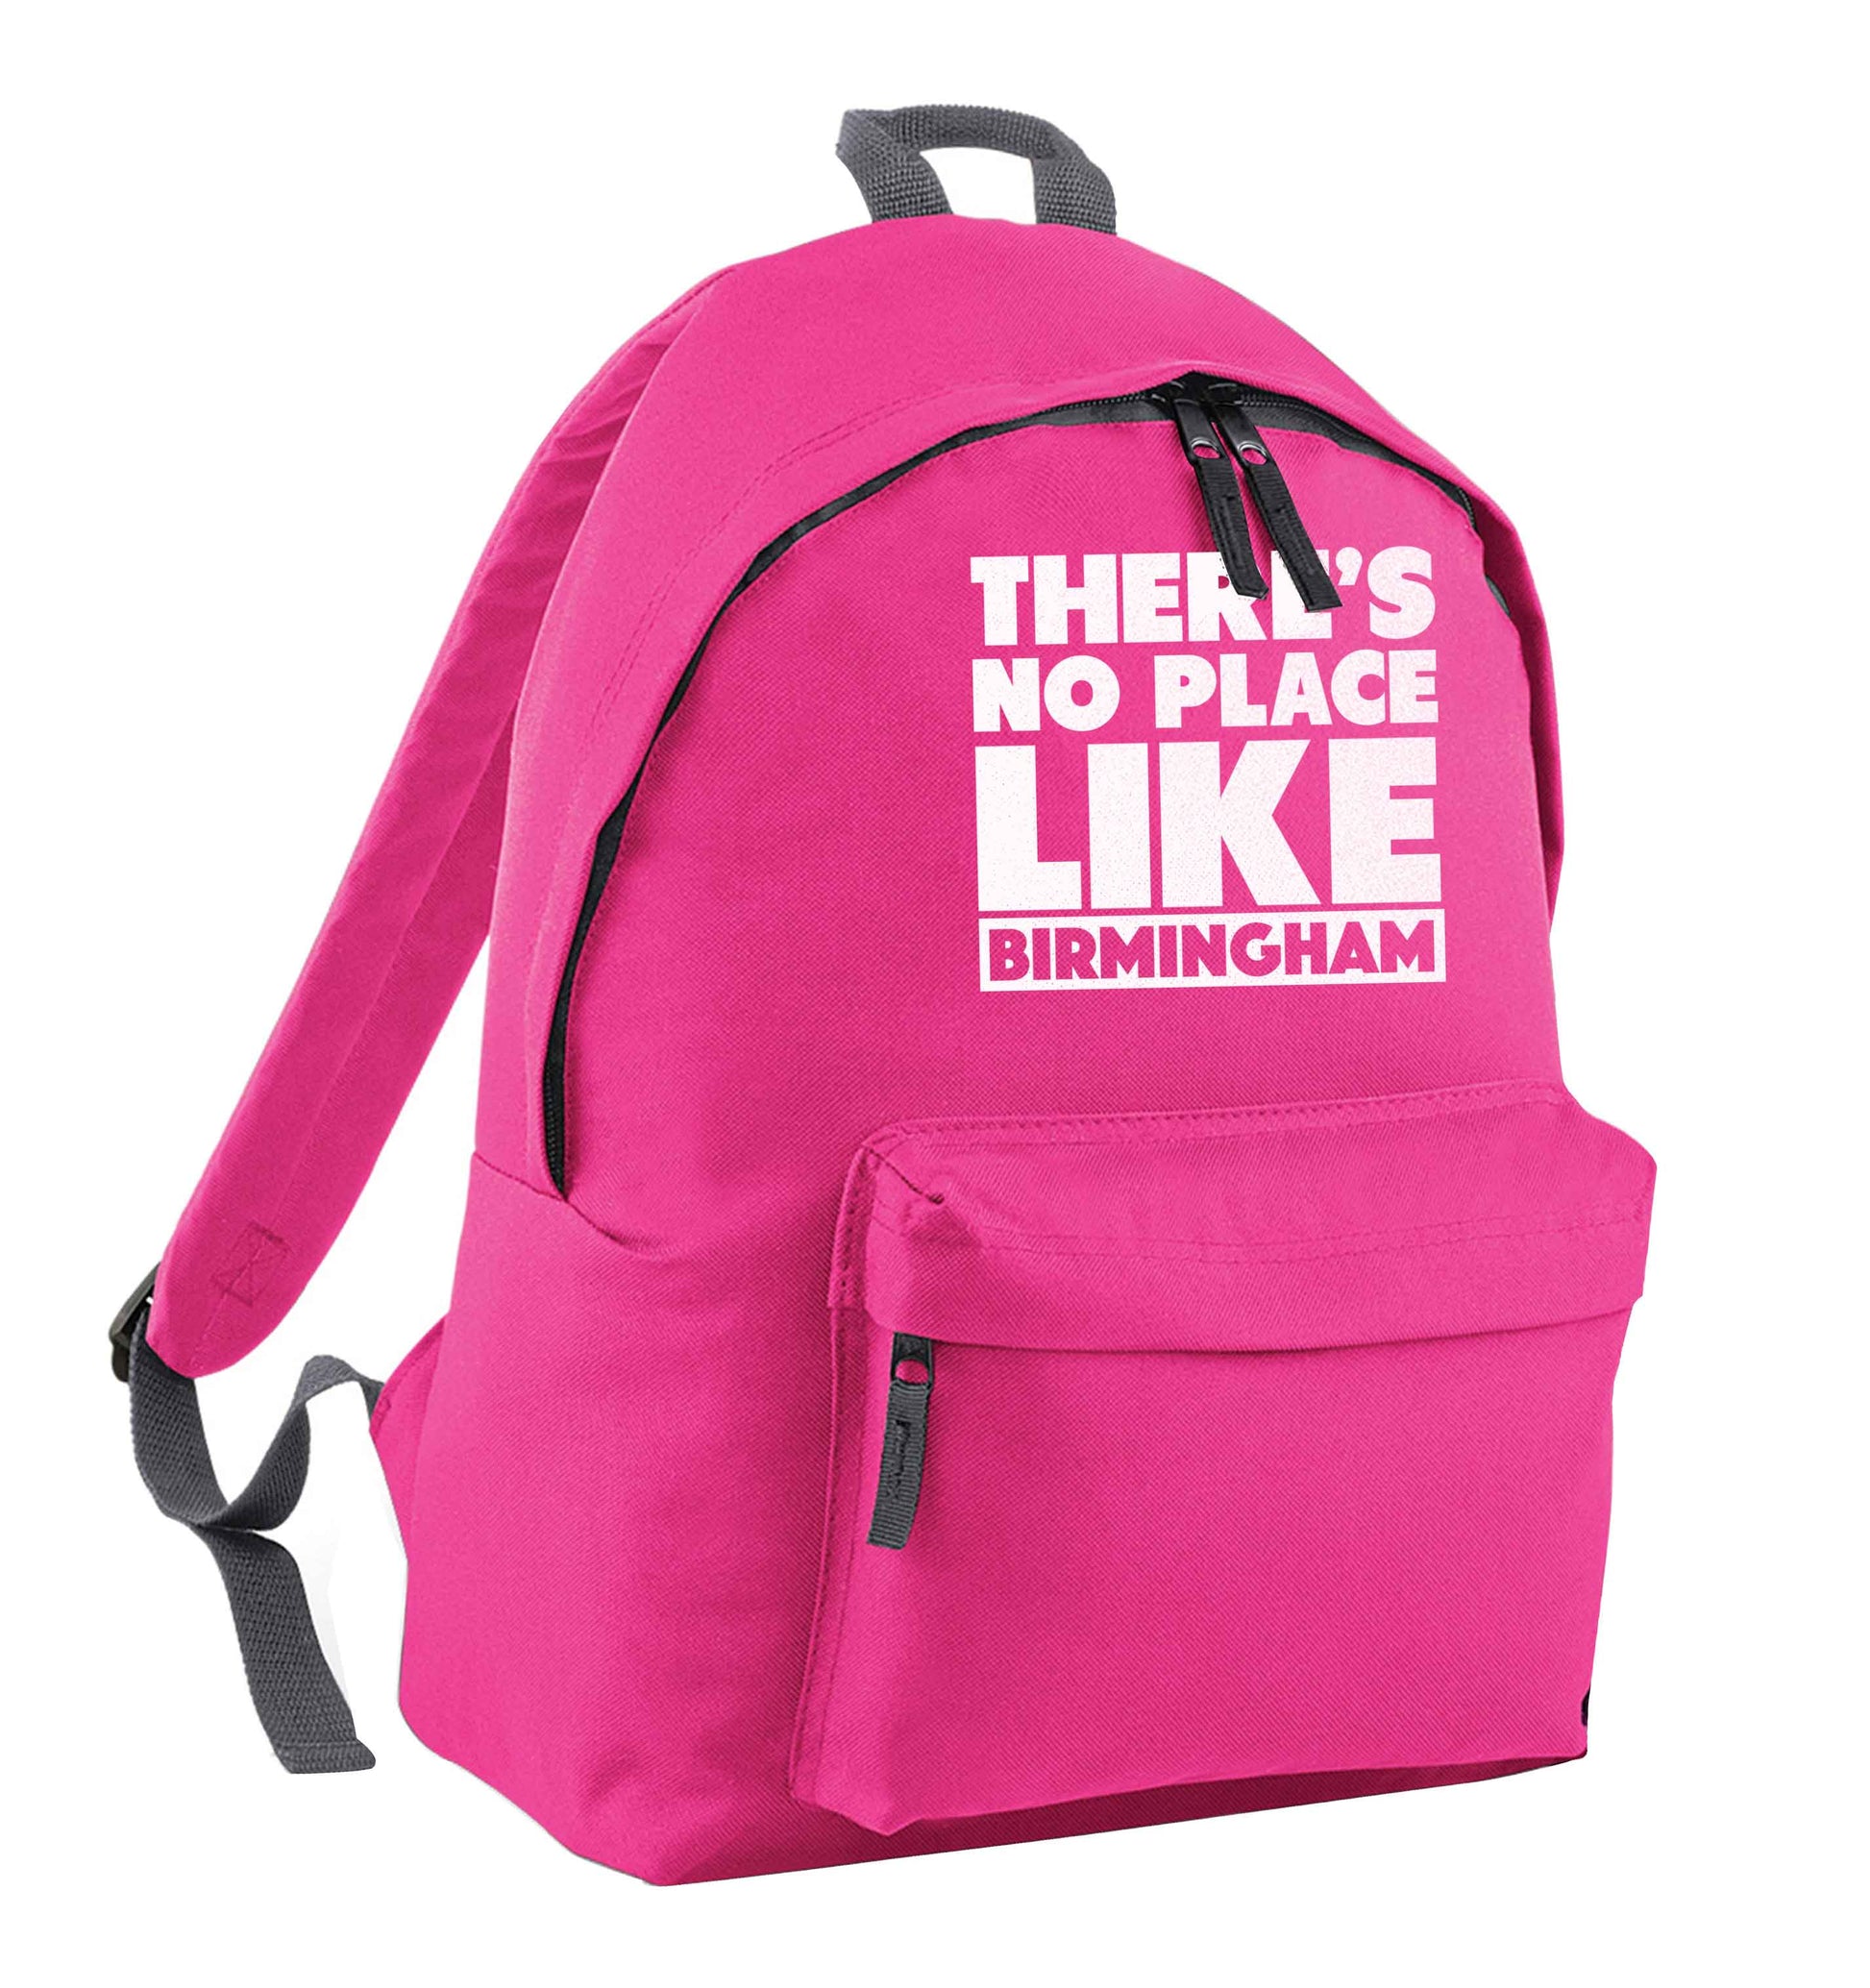 There's no place like Birmingham pink adults backpack